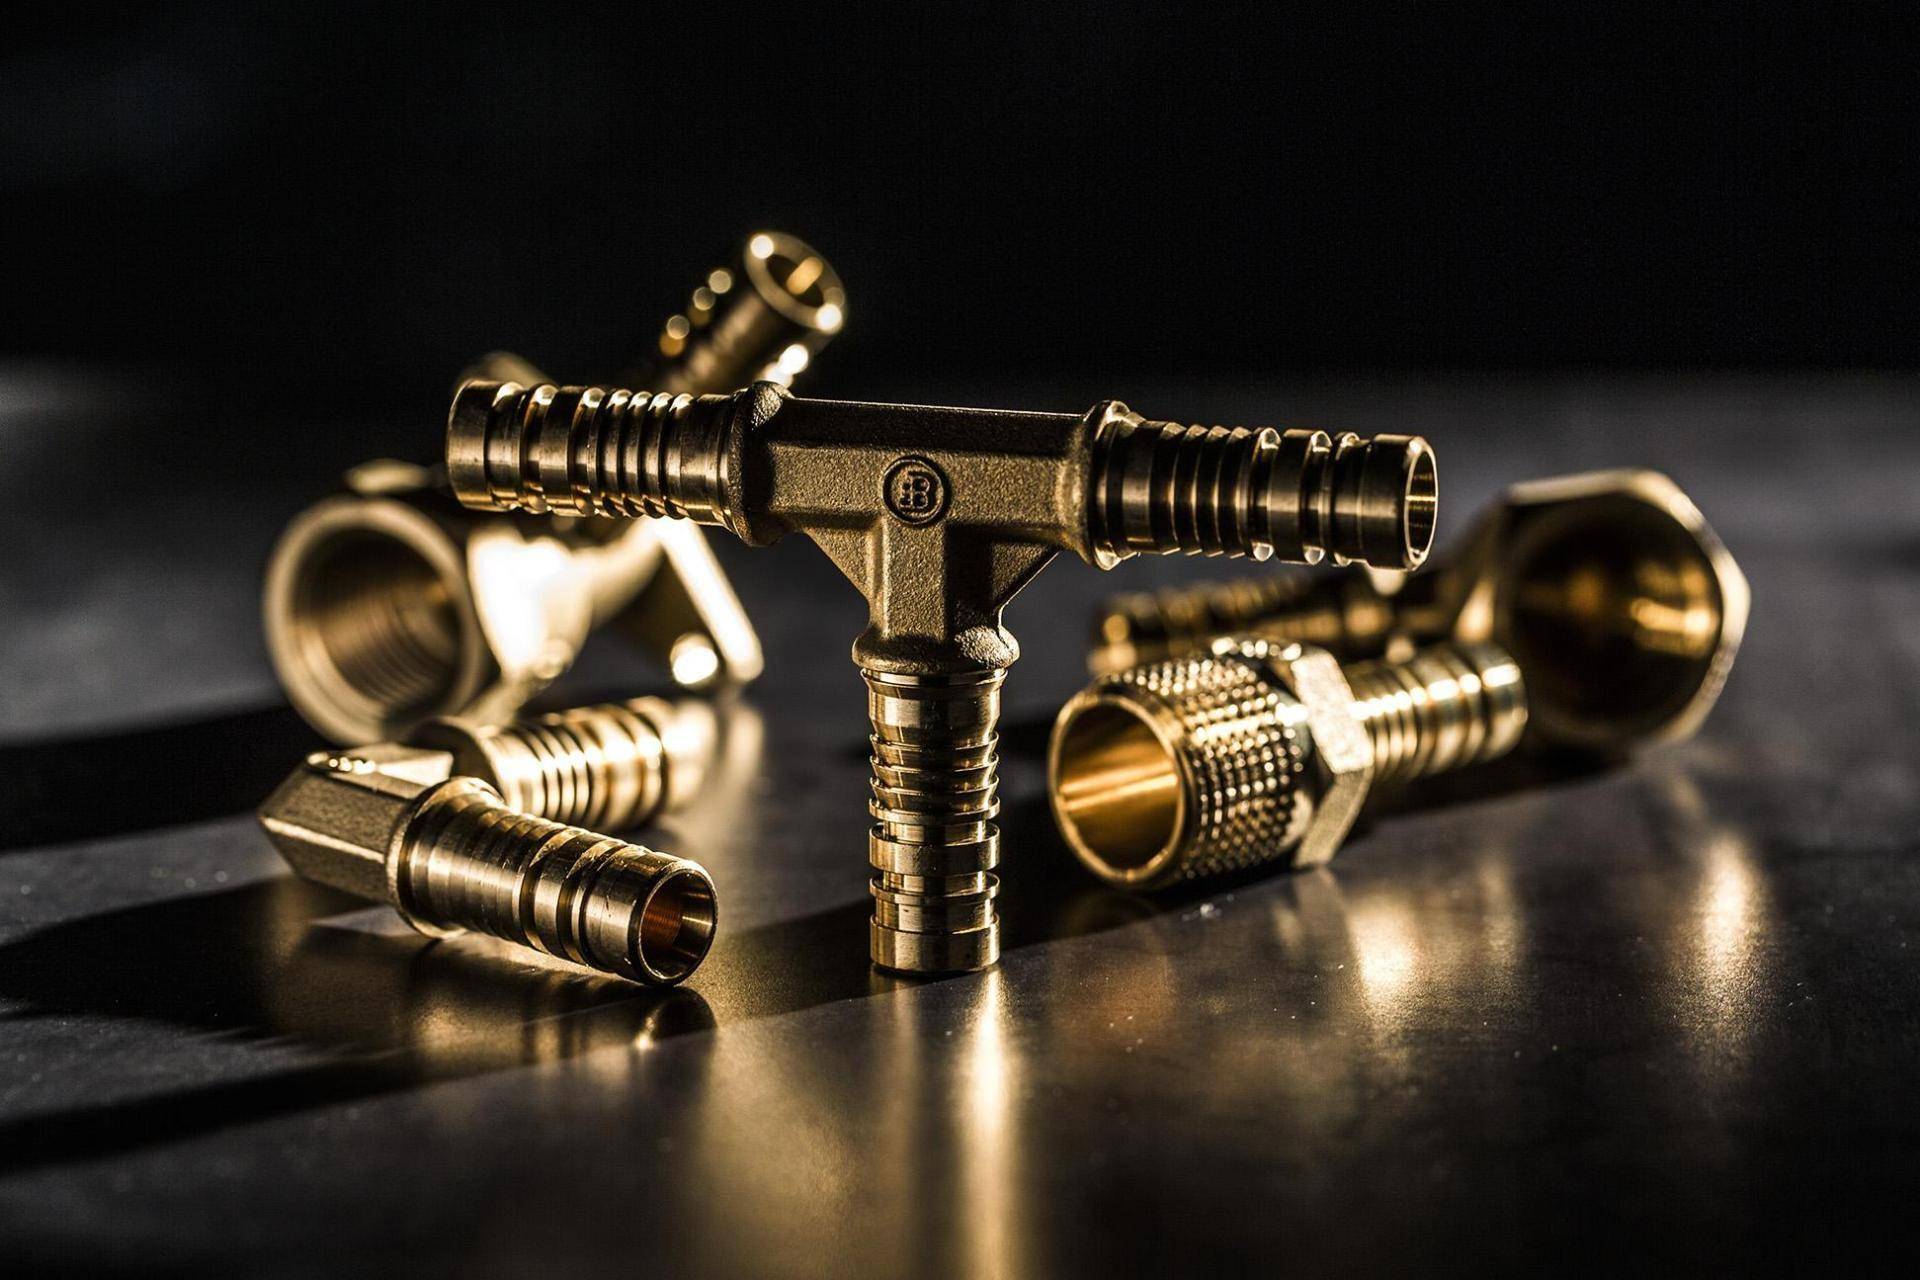 An increasingly customized production of brass nuts and components